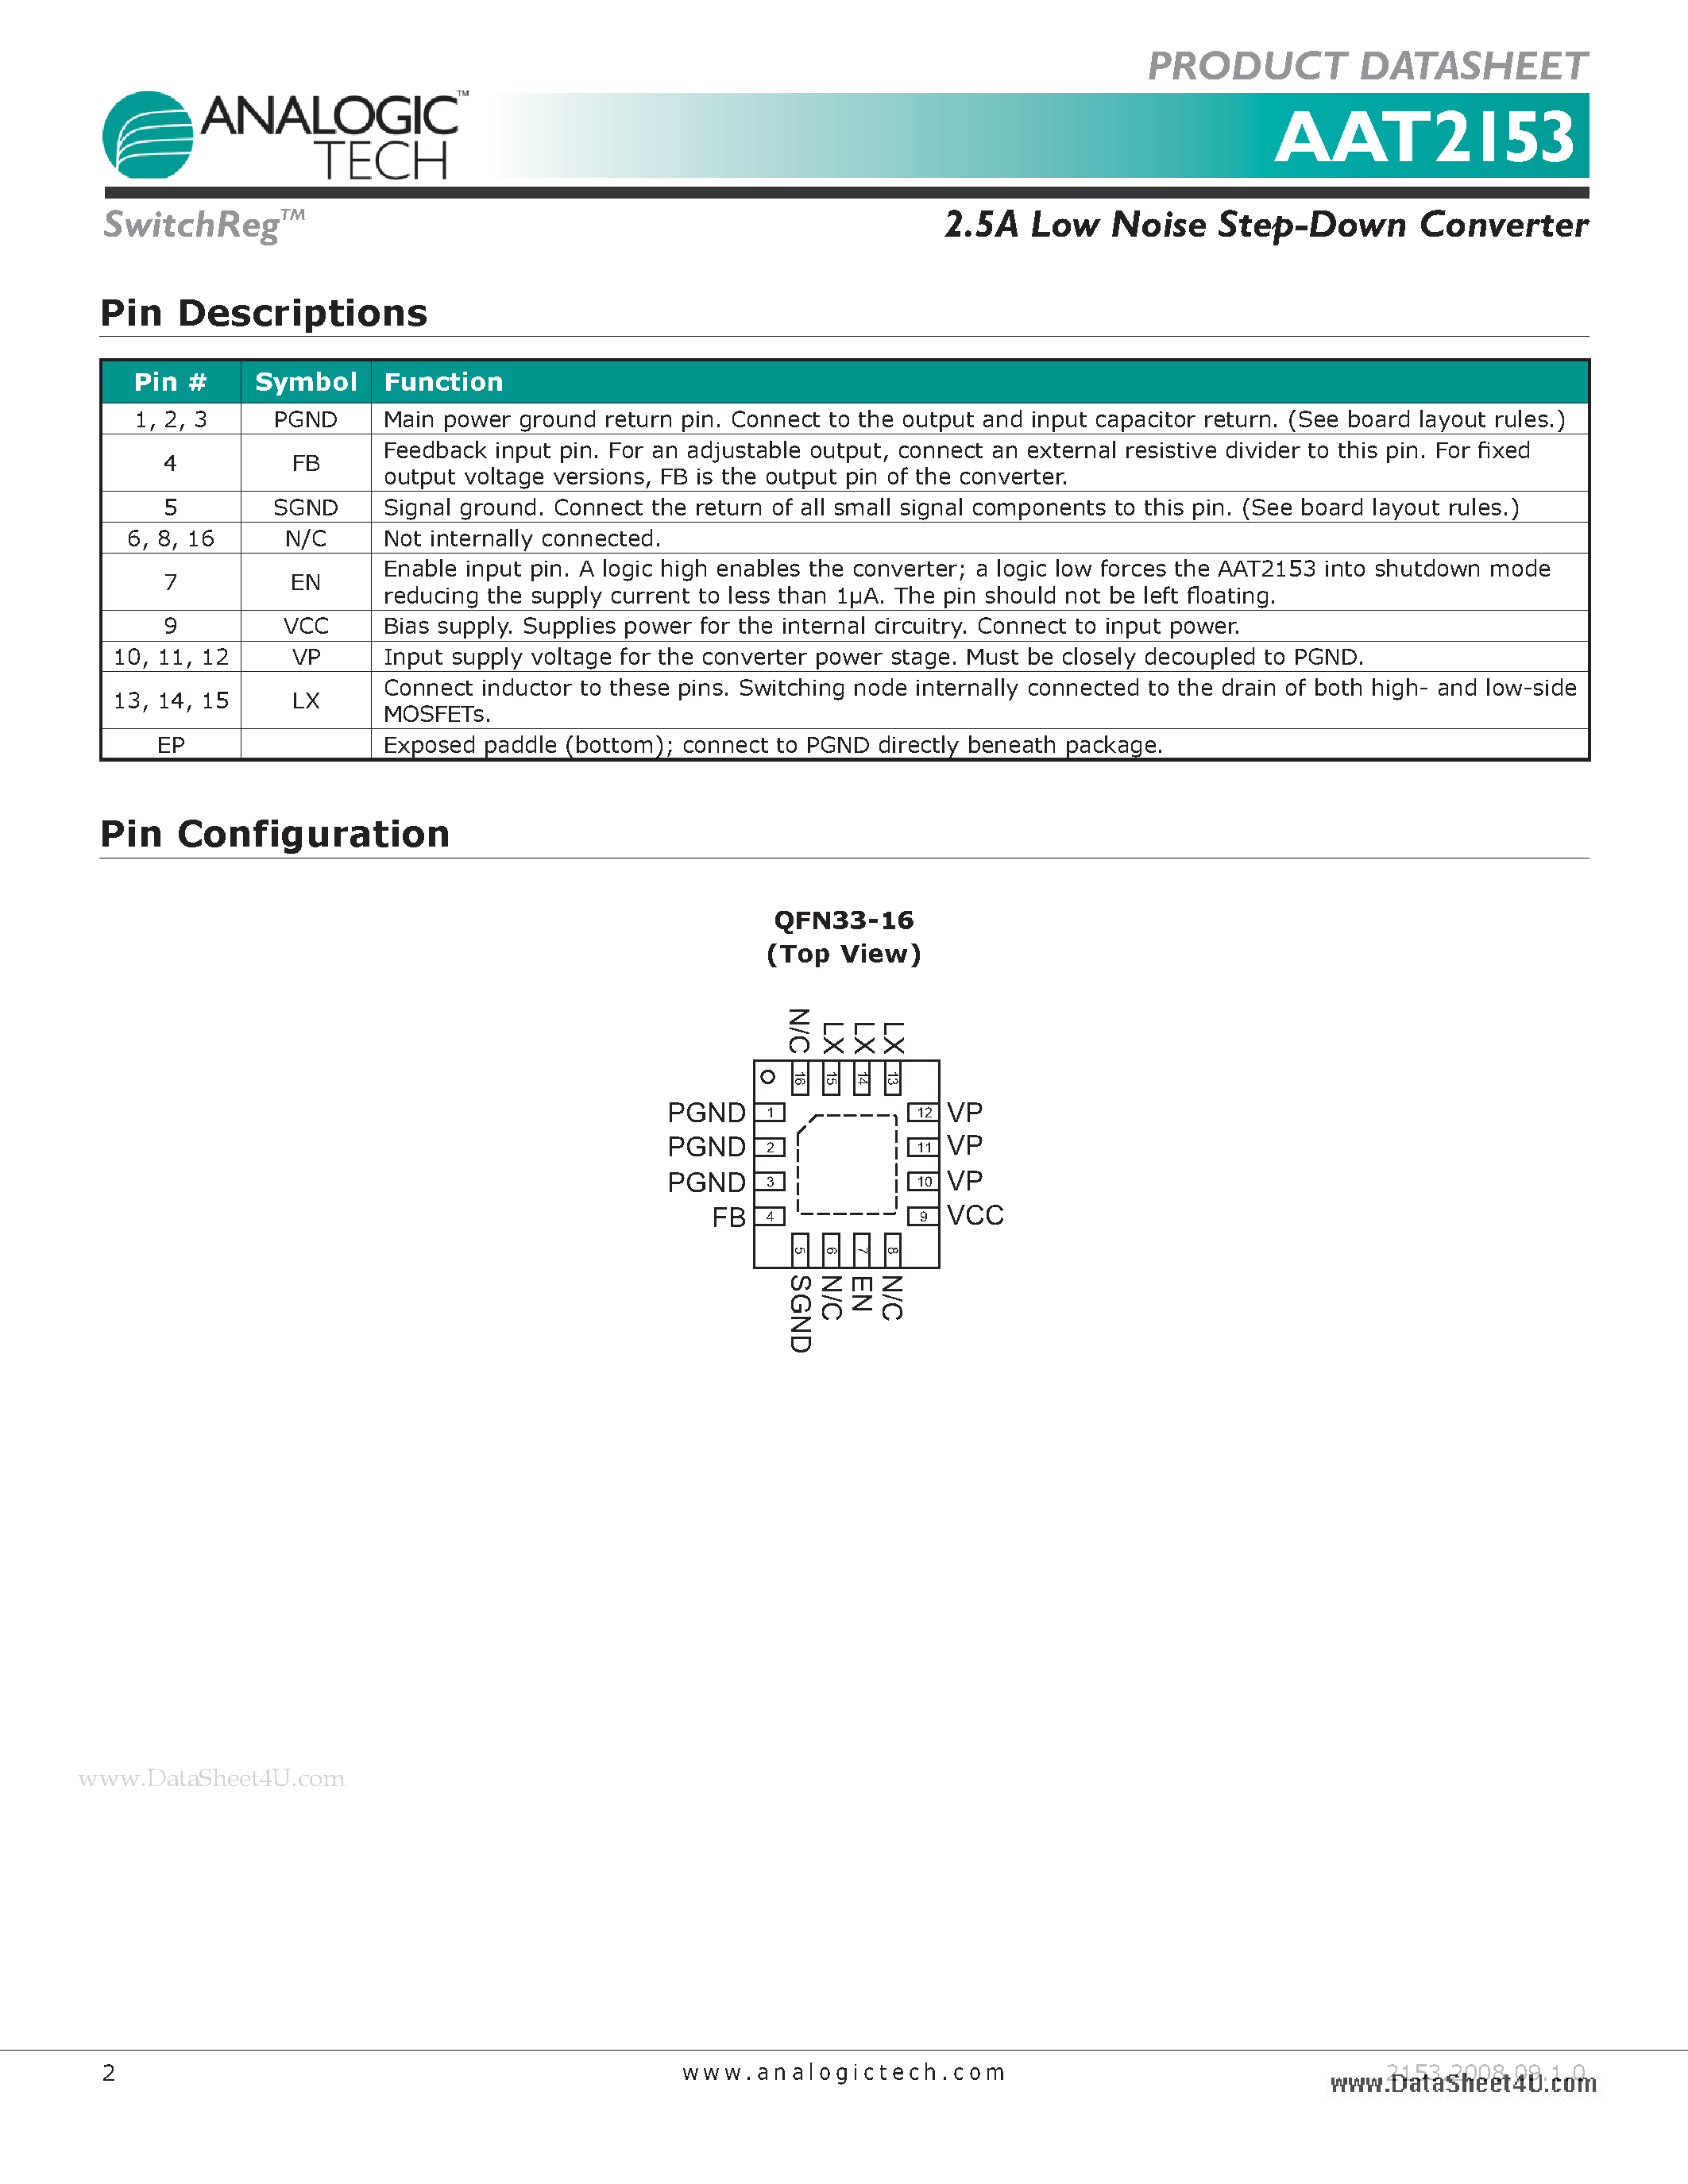 Datasheet AAT2153 - 2.5A Low Noise Step-Down Converter page 2